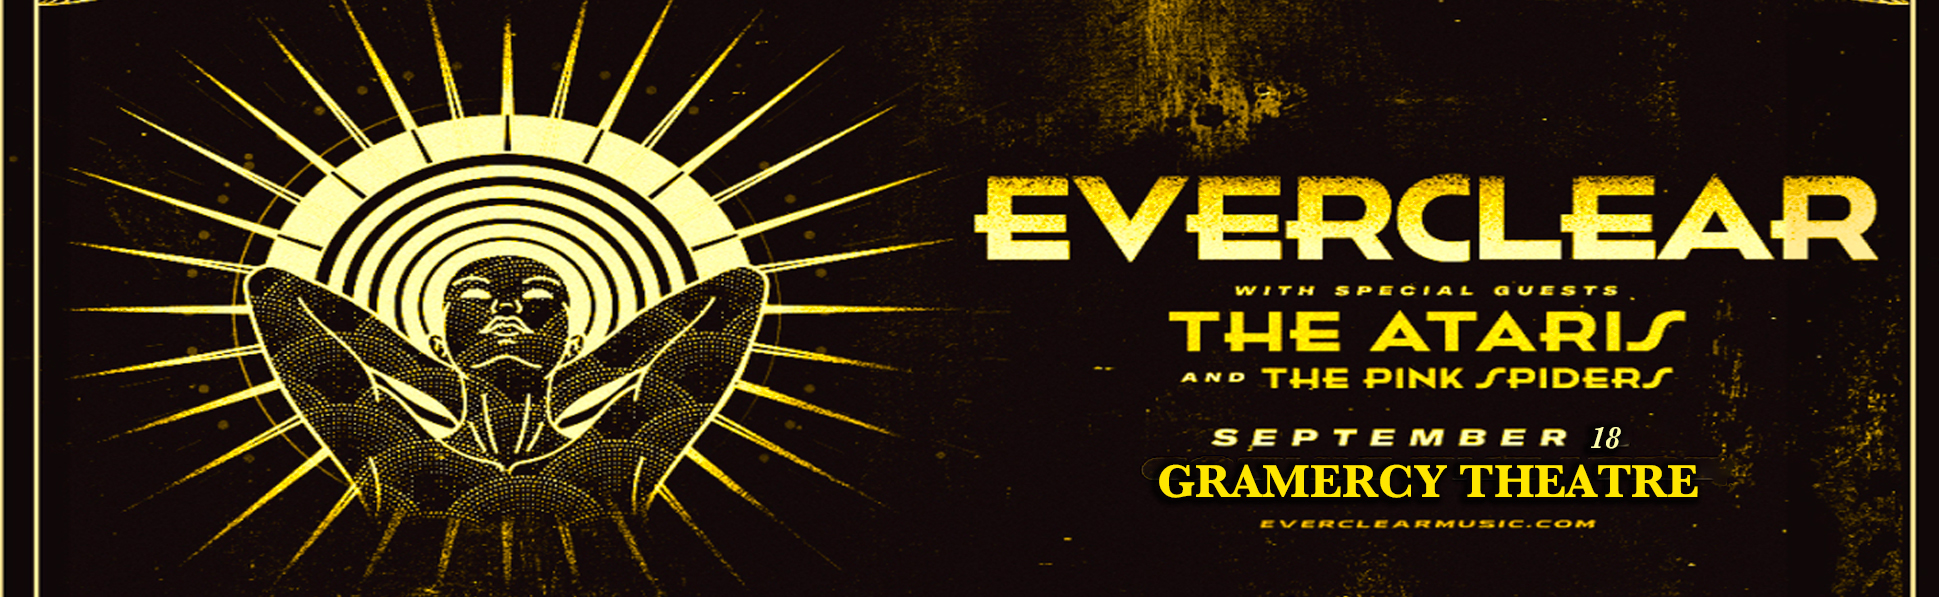 Everclear & The Ataris at Gramercy Theatre